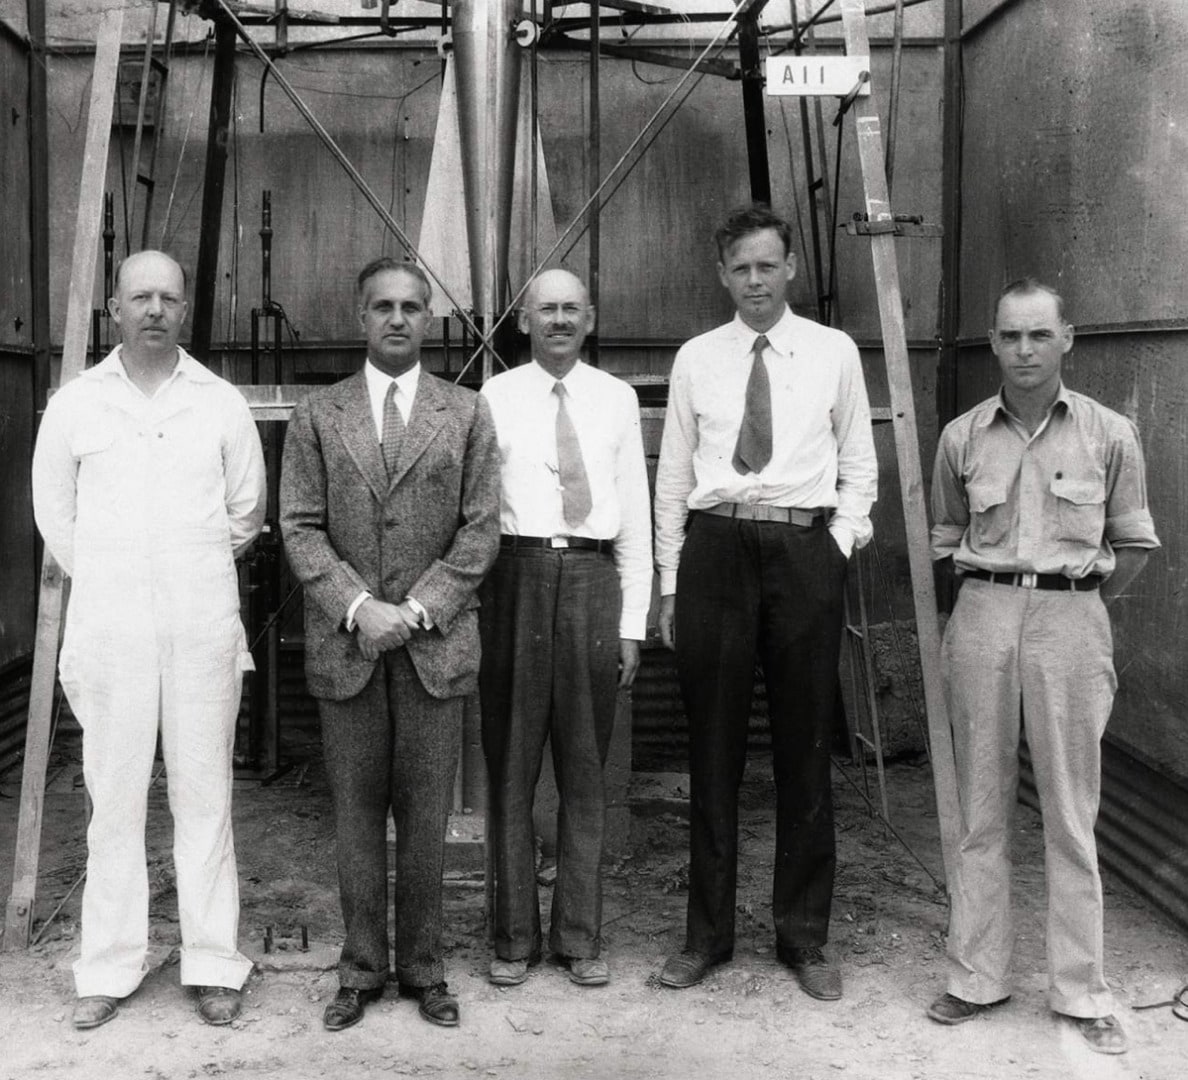 Robert Goddard, Charles Lindbergh and others in New Mexico